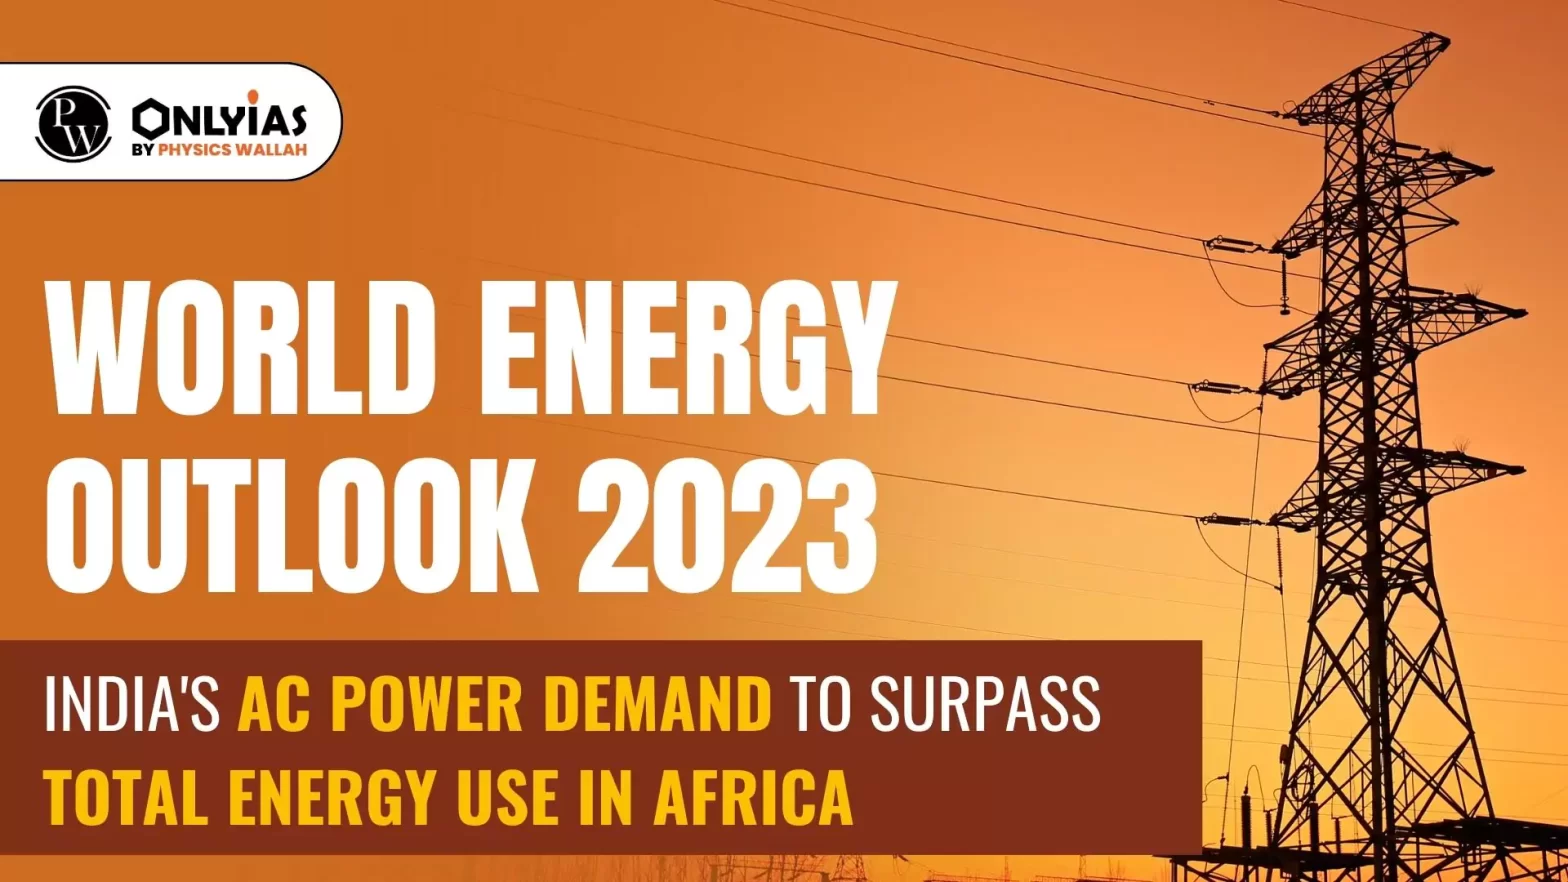 World Energy Outlook 2023: India’s AC Power Demand to Surpass Total Energy Use in Africa